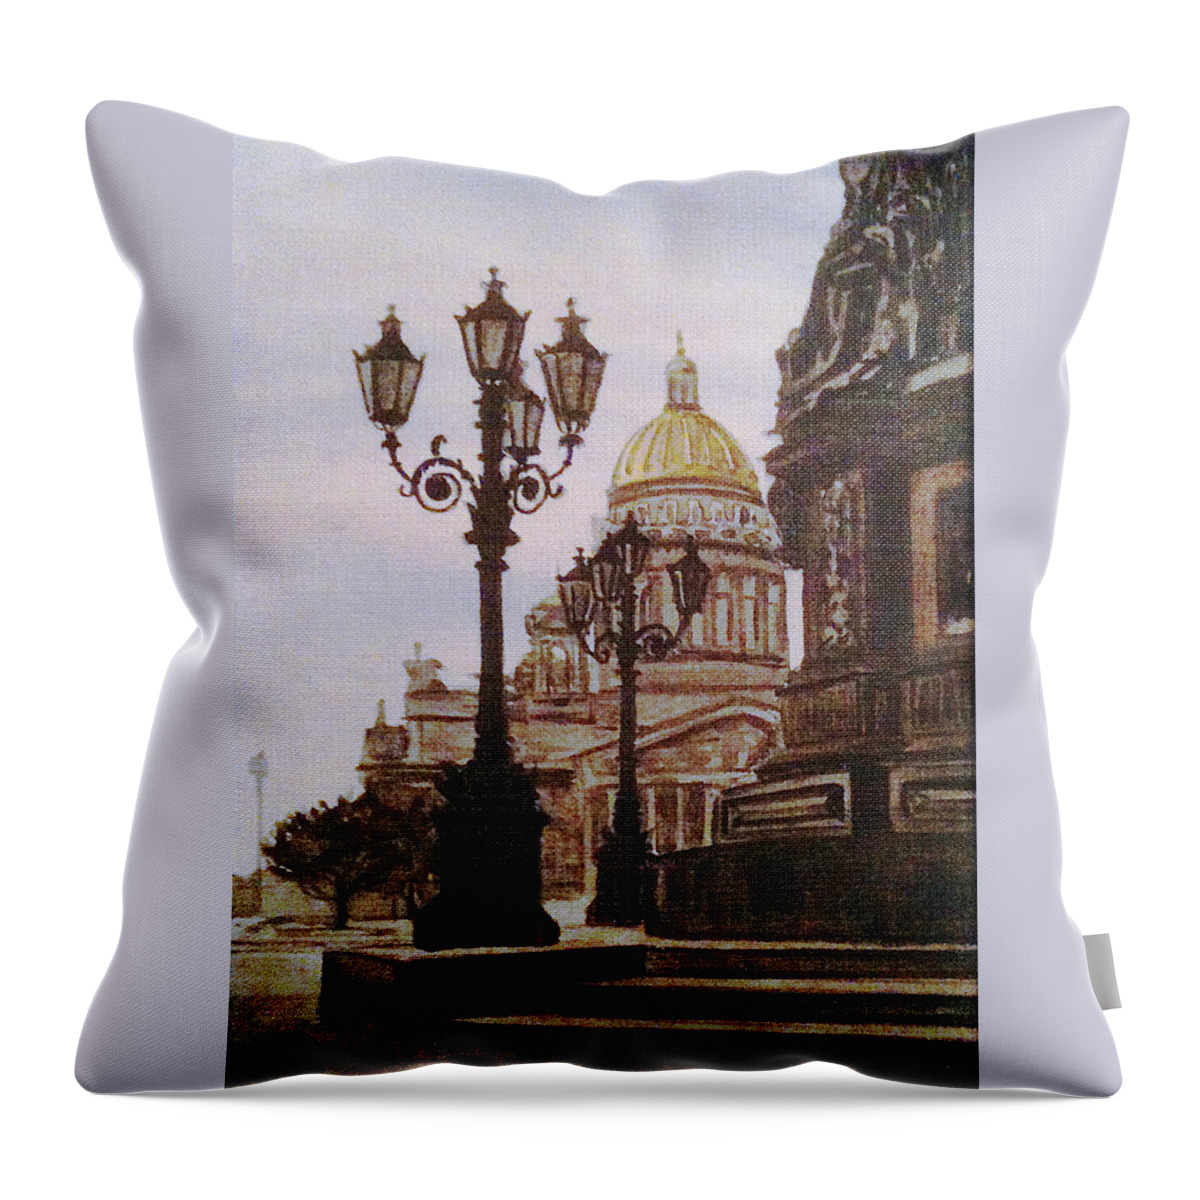 Saint Isaac's Cathedral Throw Pillow featuring the painting Saint Isaac's Cathedral by Masha Batkova